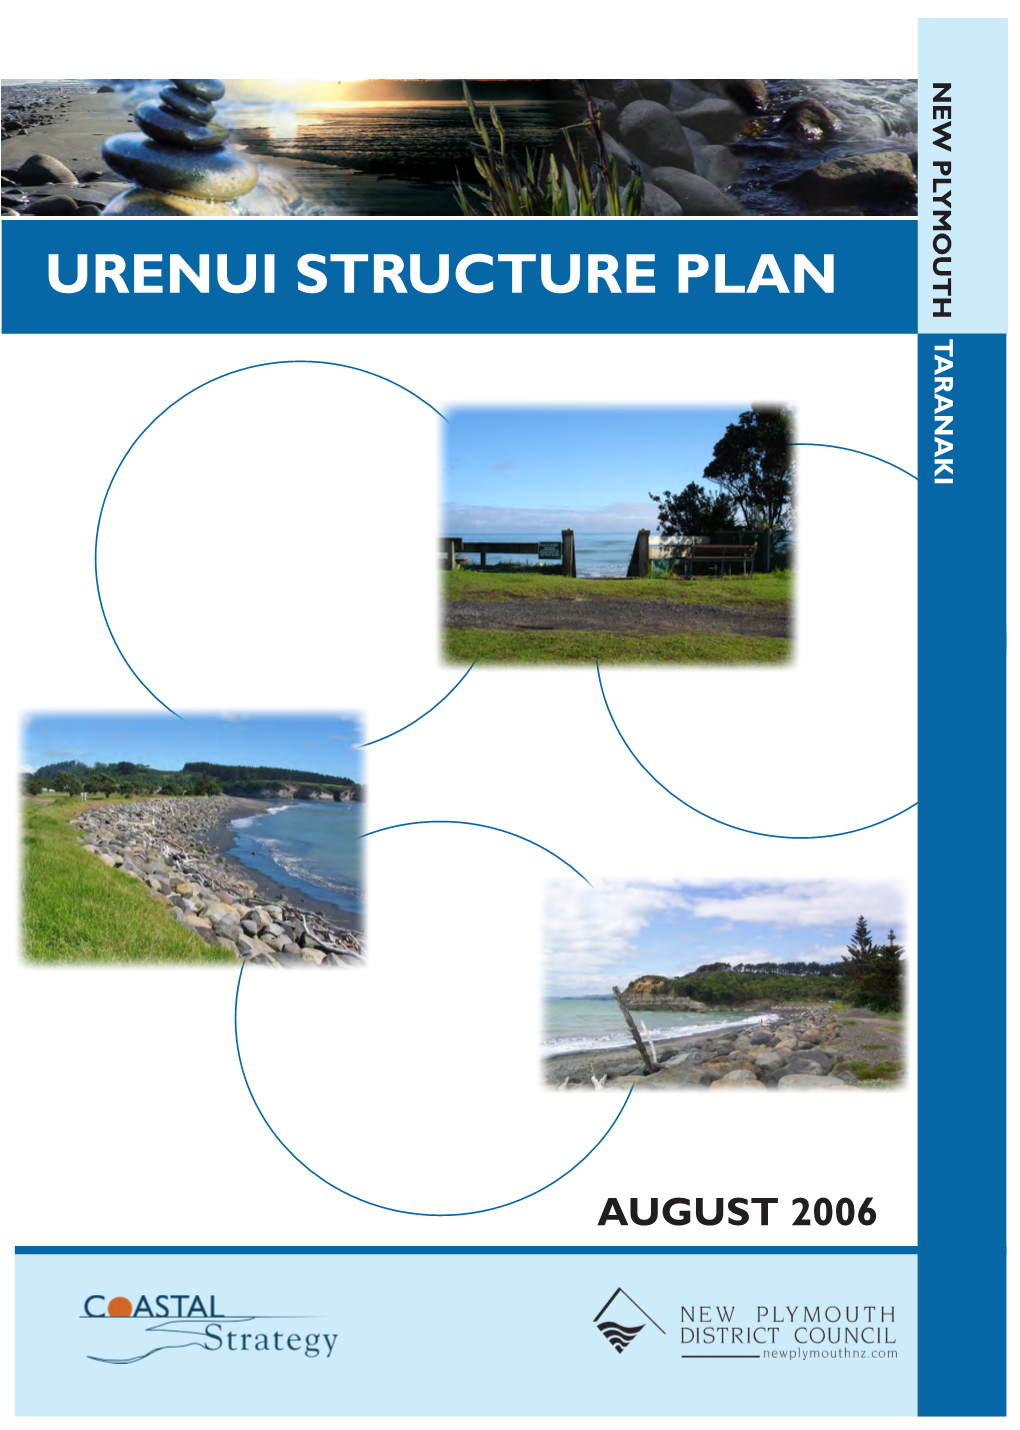 Urenui Structure Plan 15 Aug 06.Indd